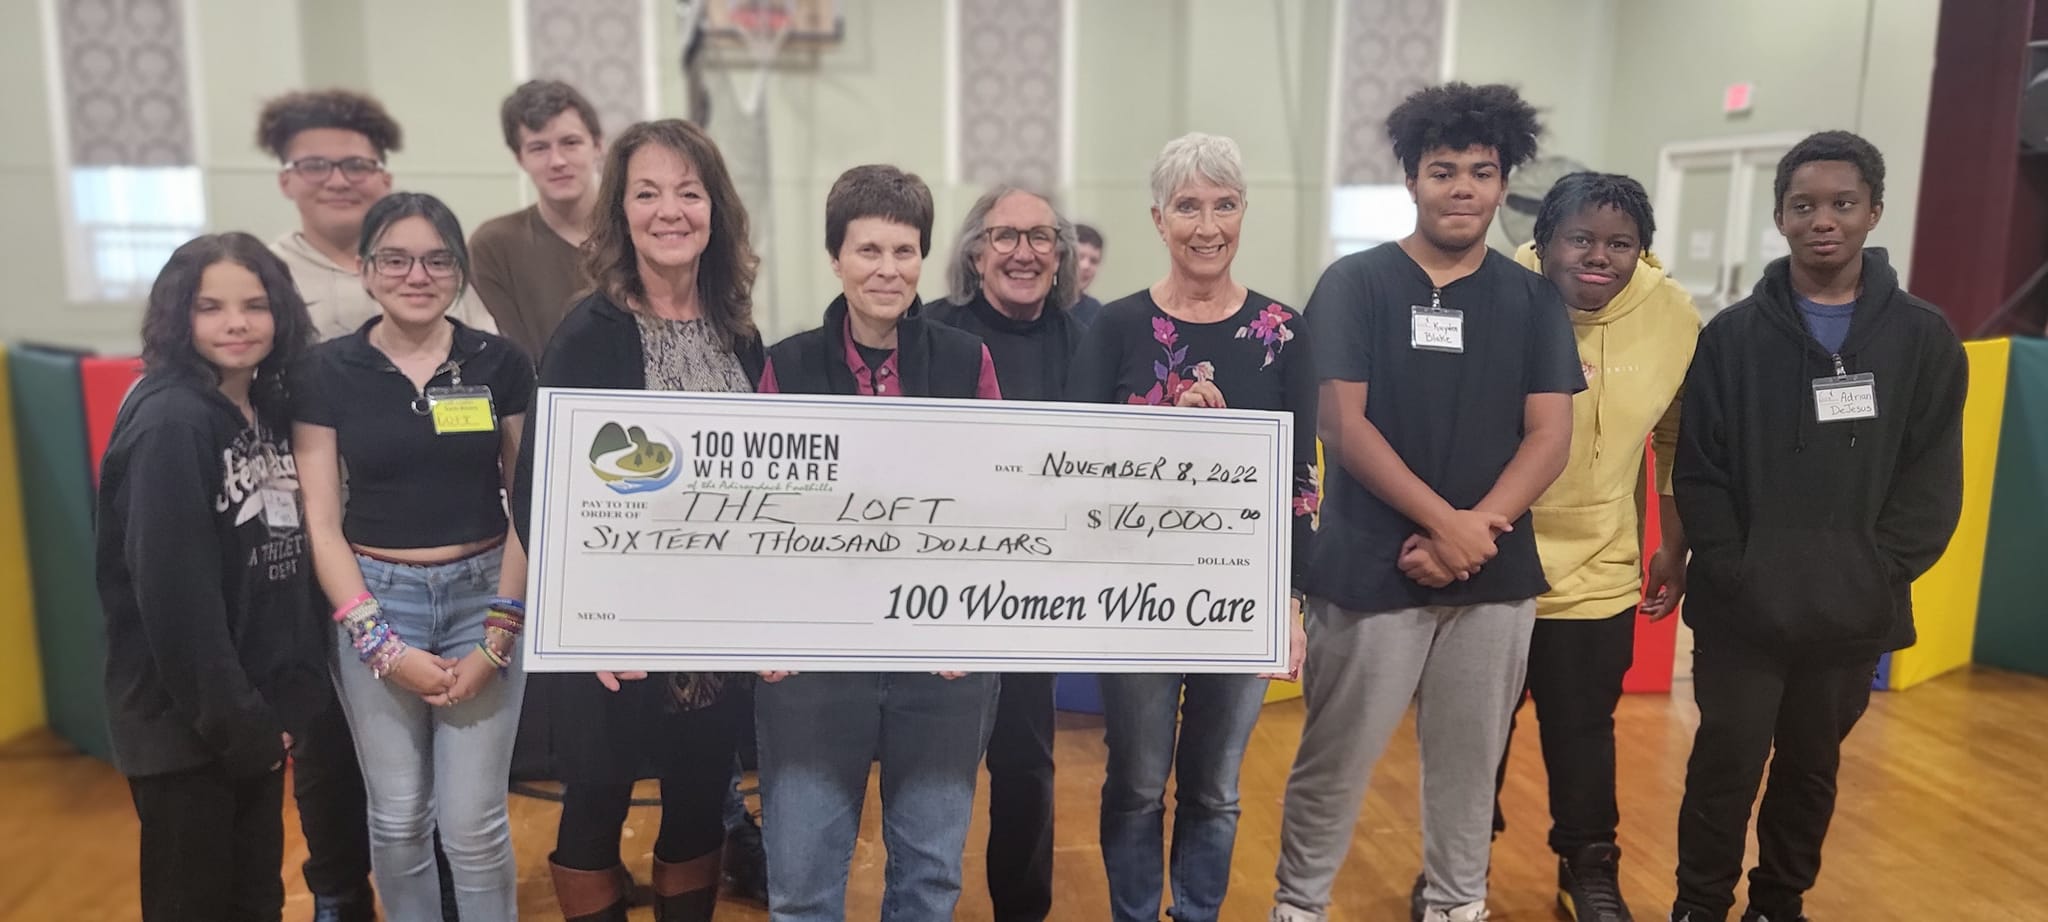 Thank you to "100 Women Who Care" organization for their generous donation of $16,000 to our Loft Program!